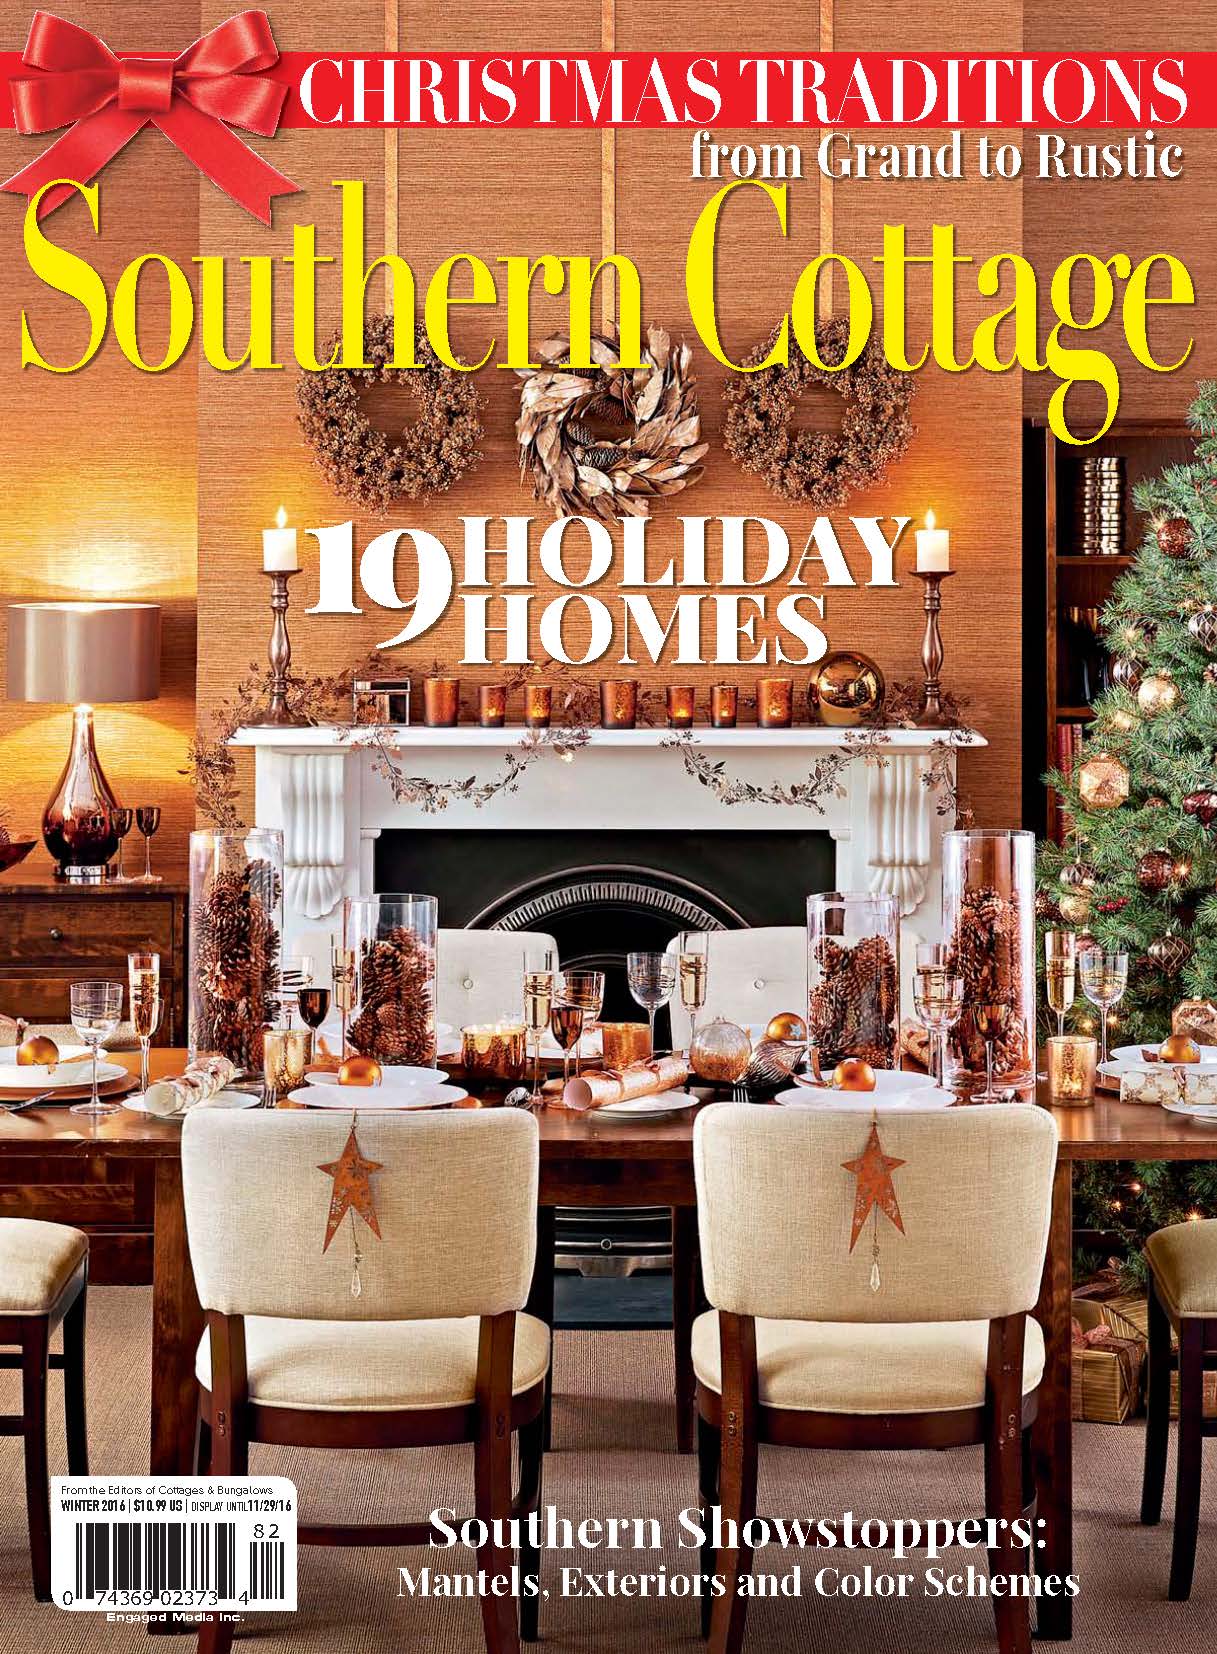 southern cottages_win16 1.jpg